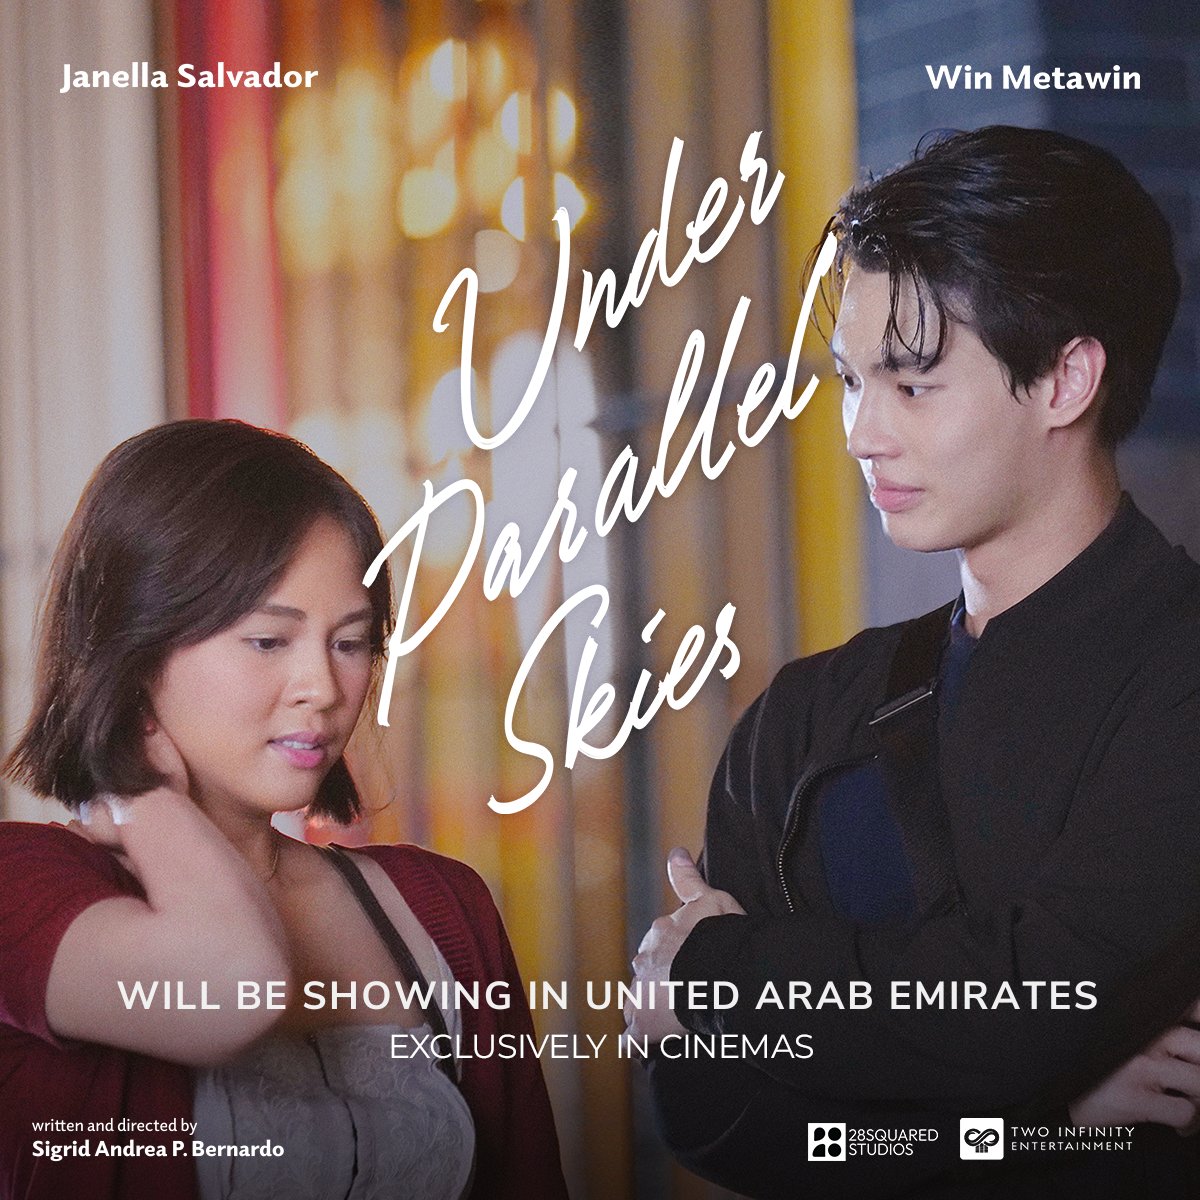 Exciting news for movie fans in the United Arab Emirates! 'Under Parallel Skies' is set to hit the big screens in UAE! Starring Win Metawin and Janella Salvador, witness a story of love and healing in cinemas near you soon! Stay tuned for more updates. #UnderParallelSkies